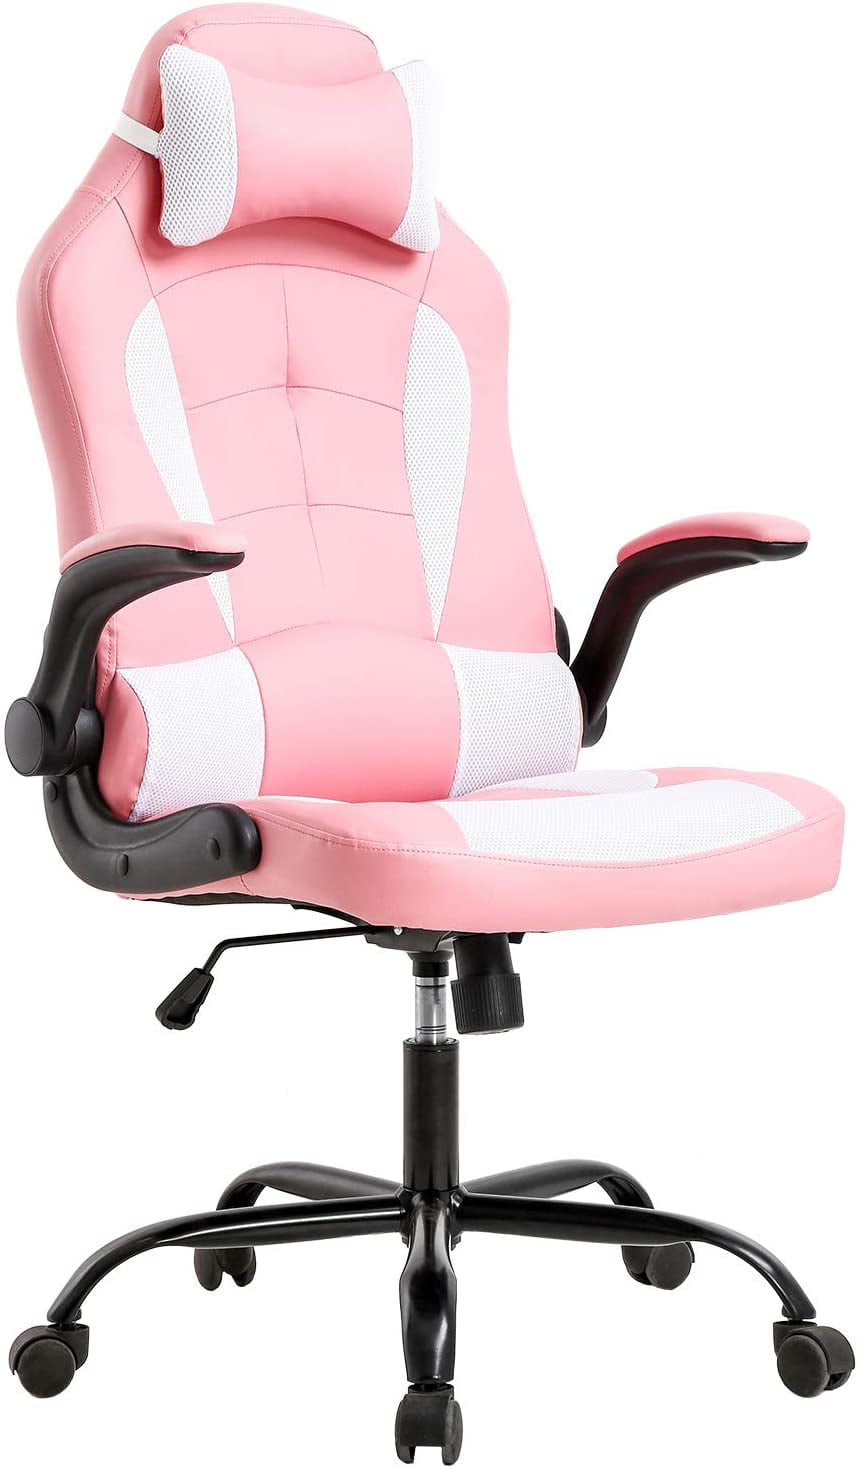 Gaming Chair Office Chair Desk Chair with Lumbar Support Flip Up Arms